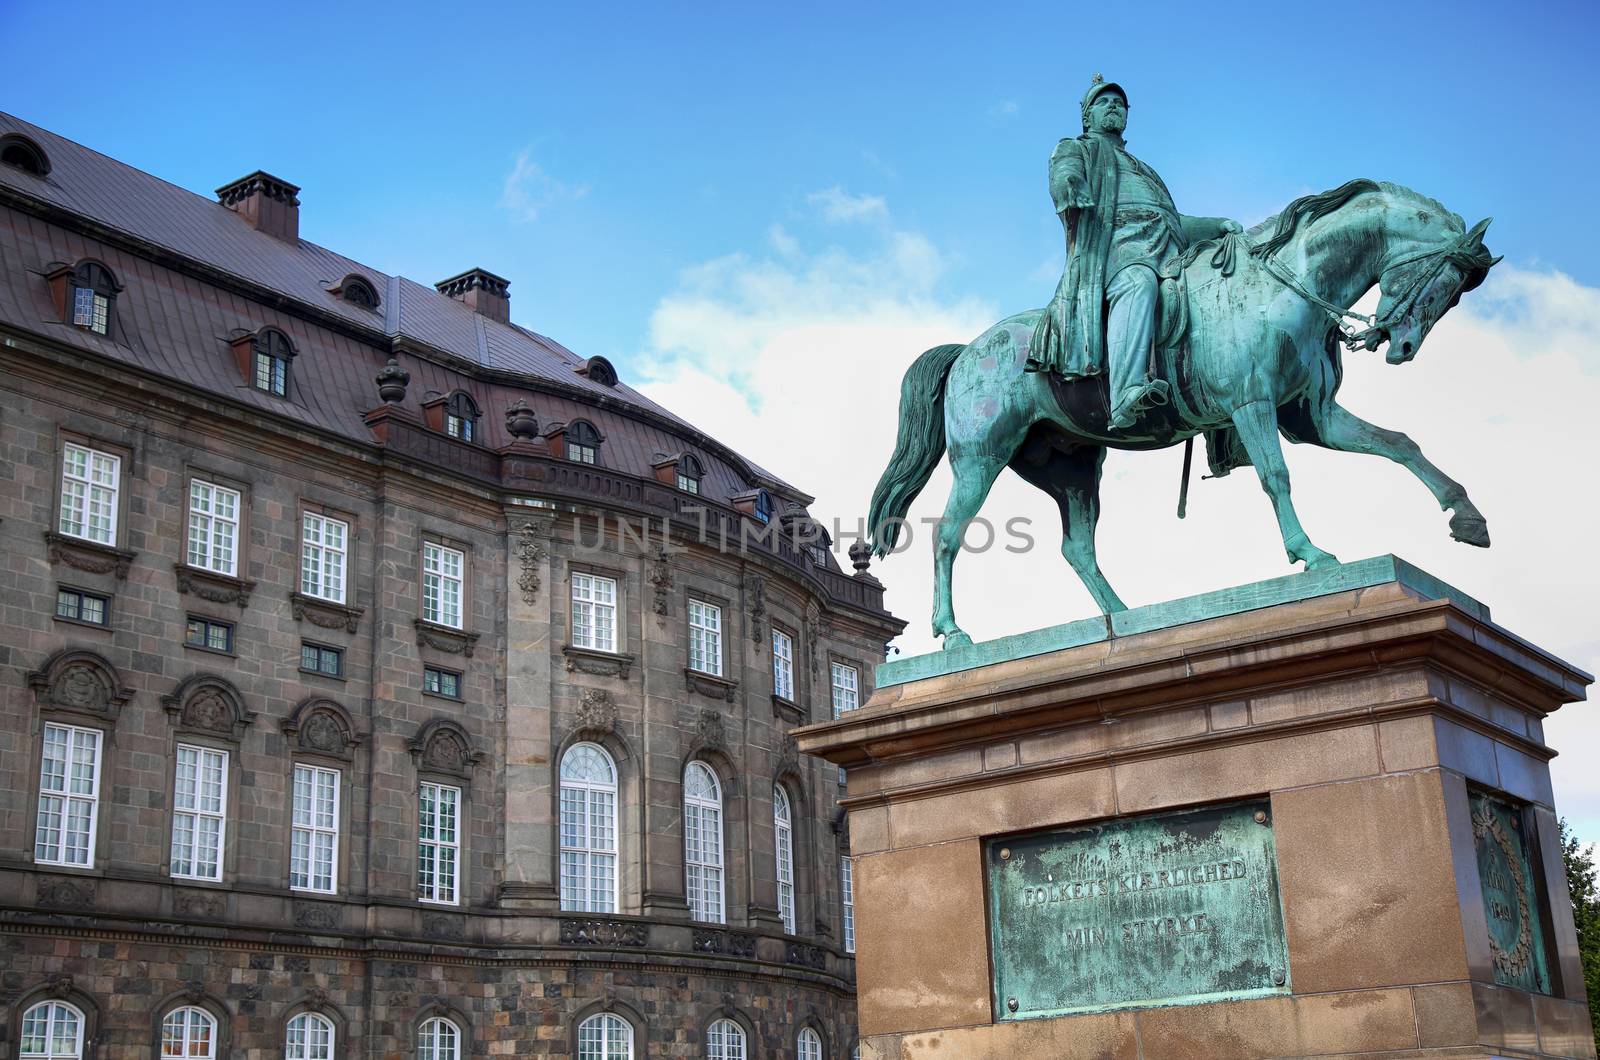 The equestrian statue of King Frederik VII in front of the Christiansborg Palace in Copenhagen, Denmark